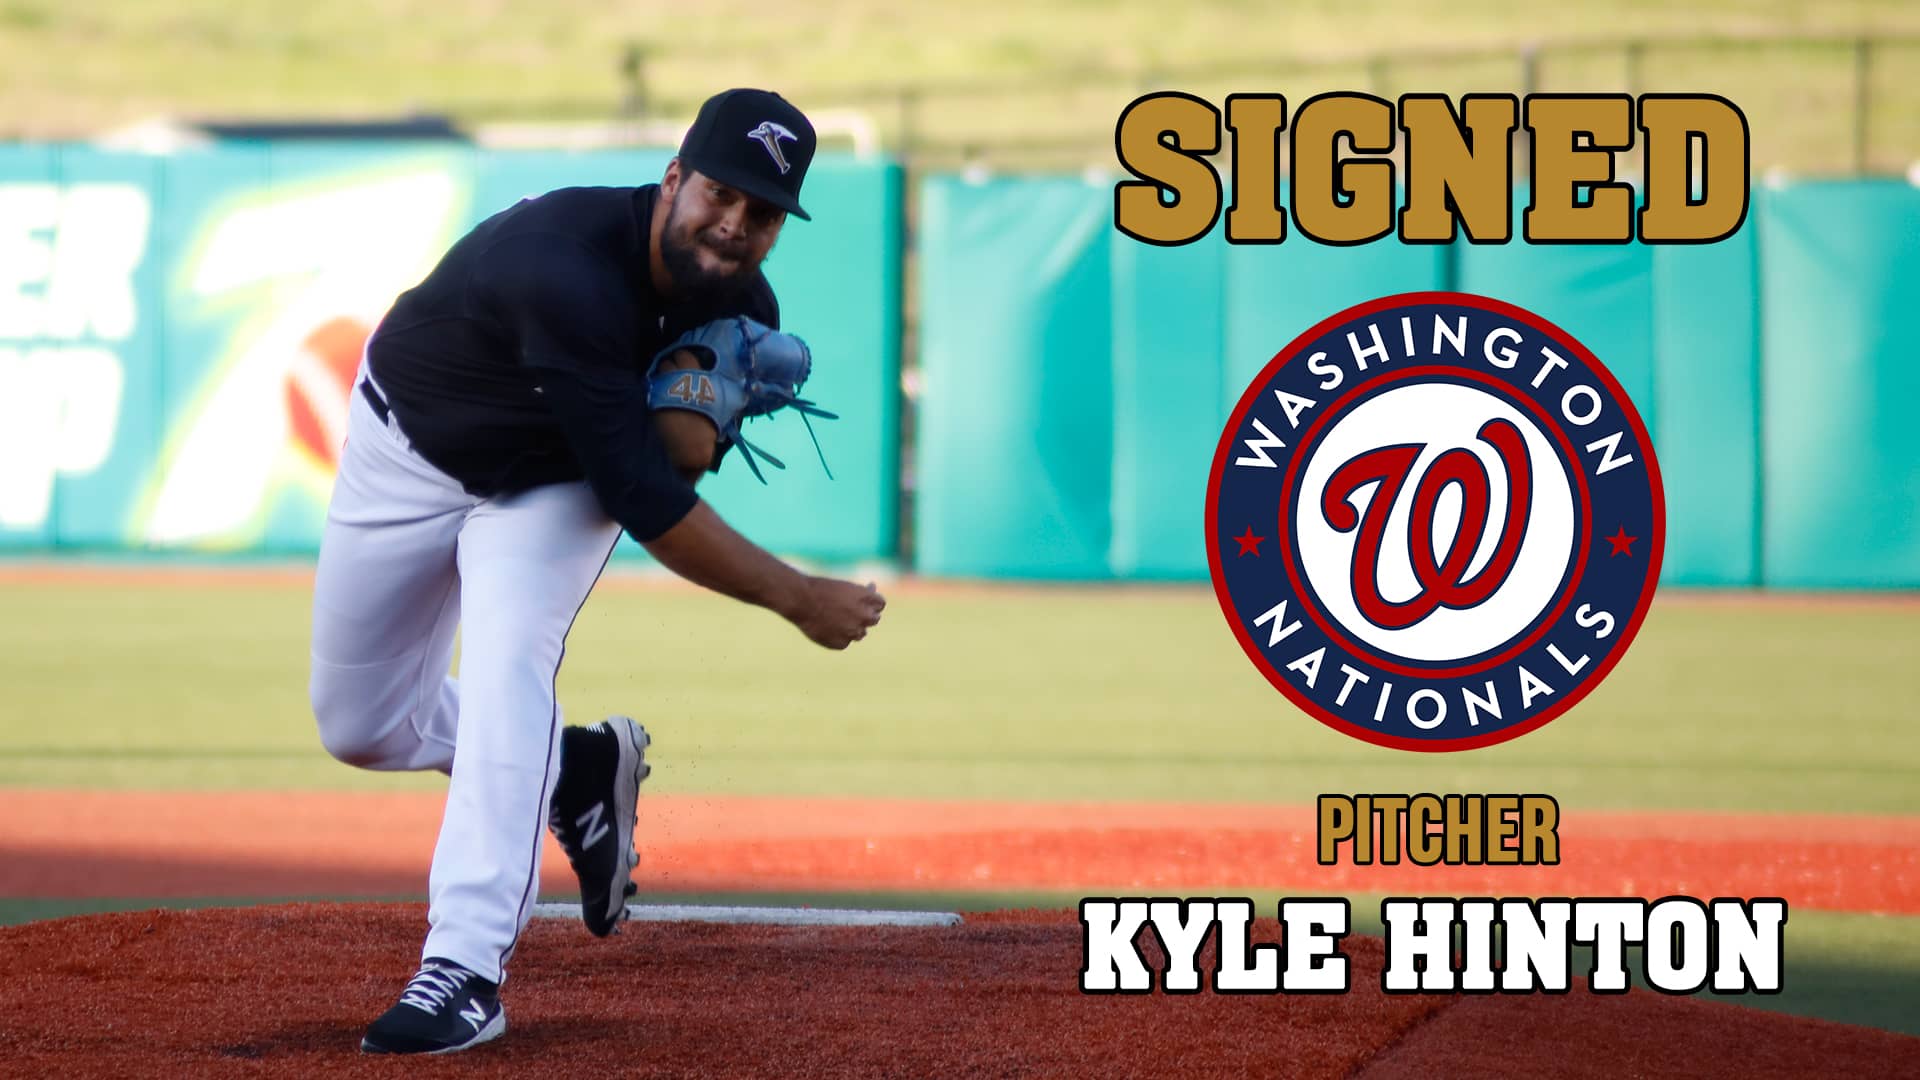 kyle-hinton-signs-with-nationals-jpg